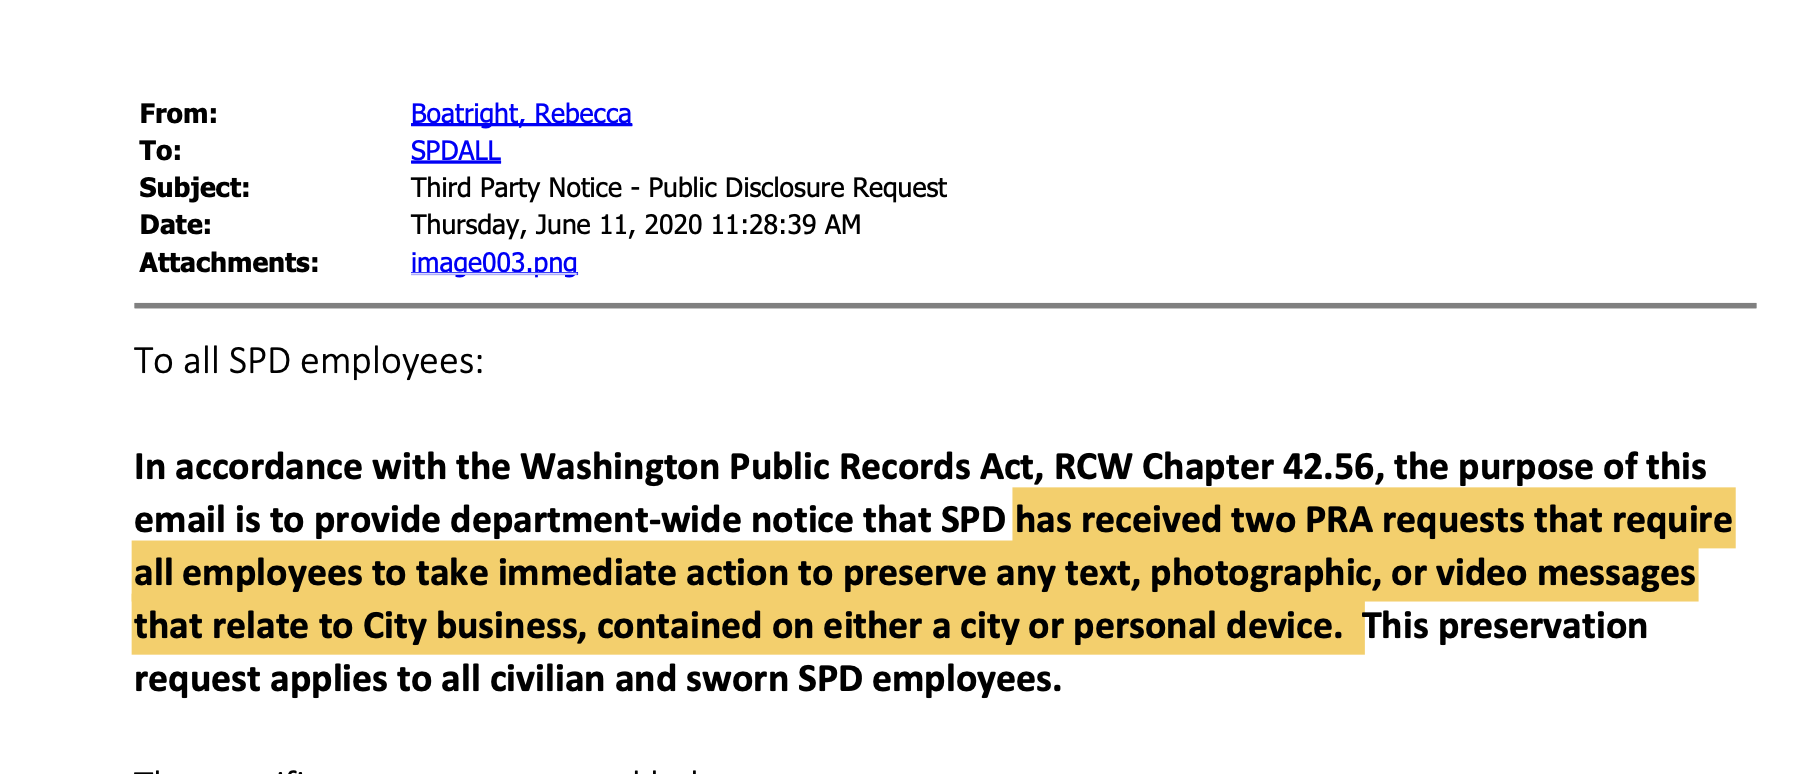 Image of an email sent on June 11, 2020 email by Seattle Police Department chief legal counsel Rebecca Boatright to all department personnel, notifying them to preserve their text messages.